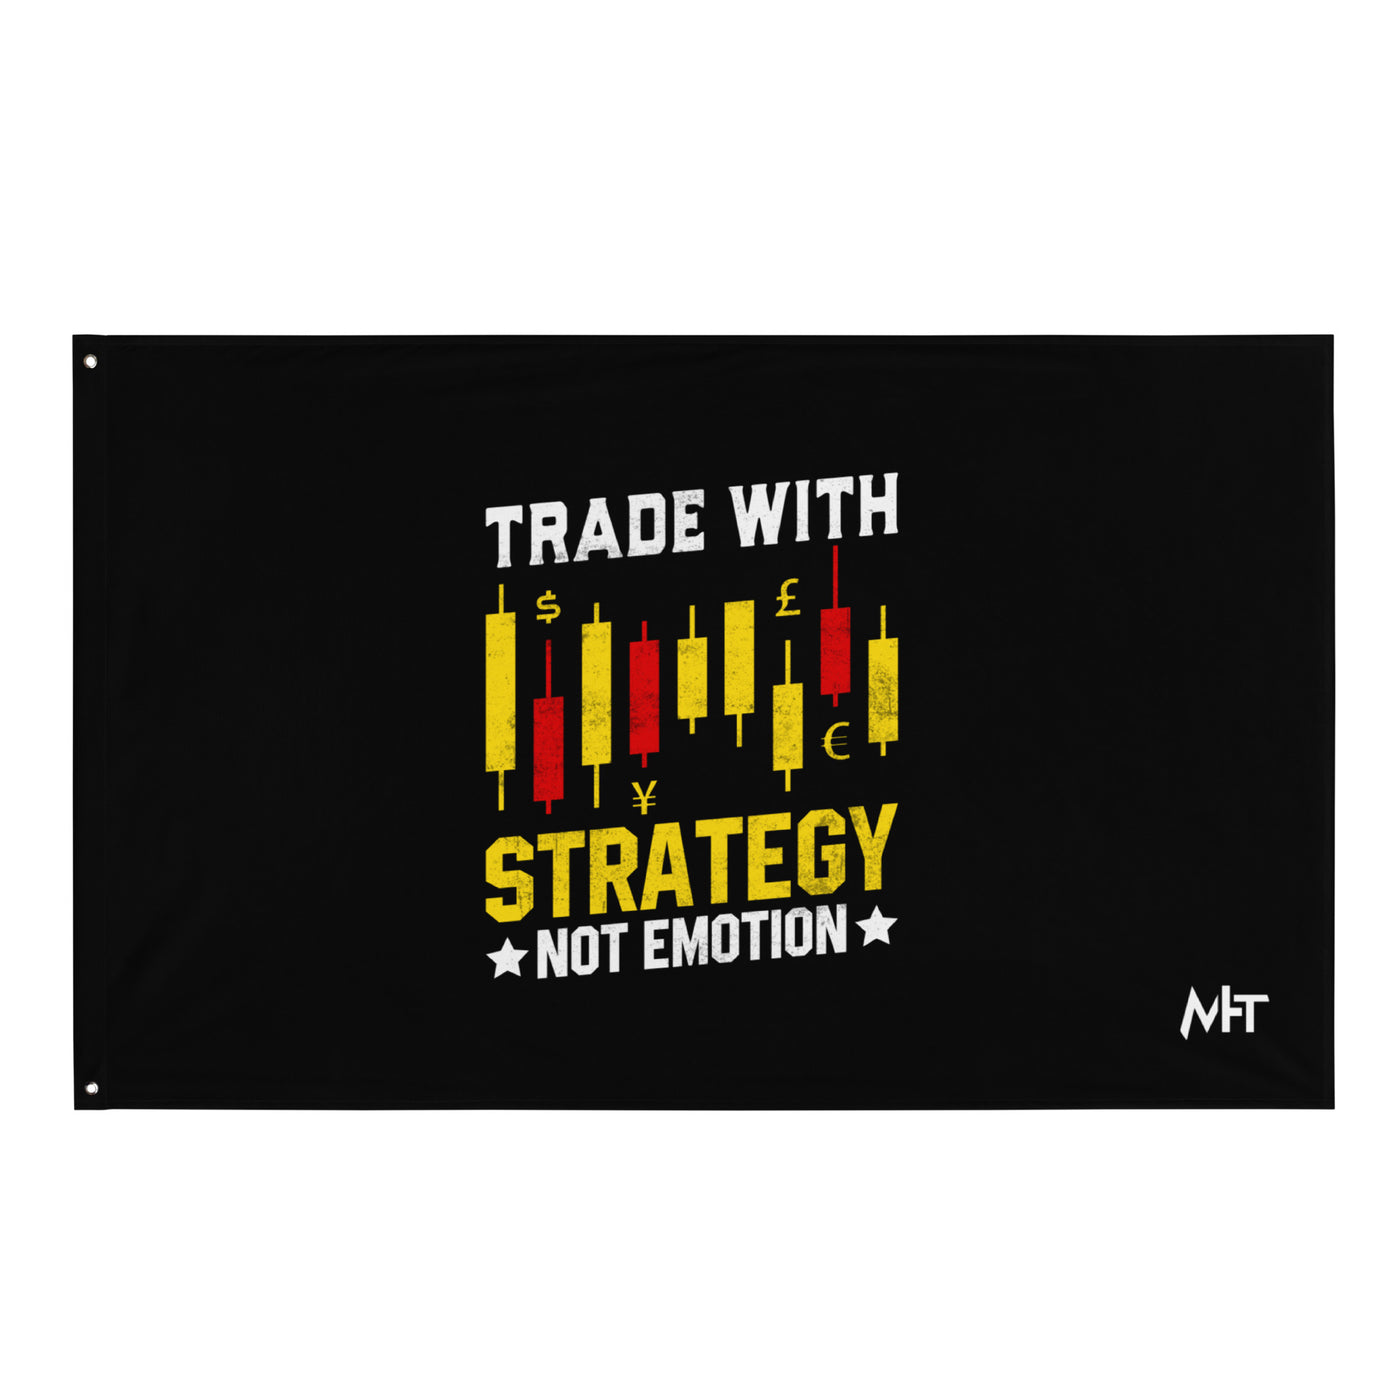 Trade with Strategy not Emotion - Flag